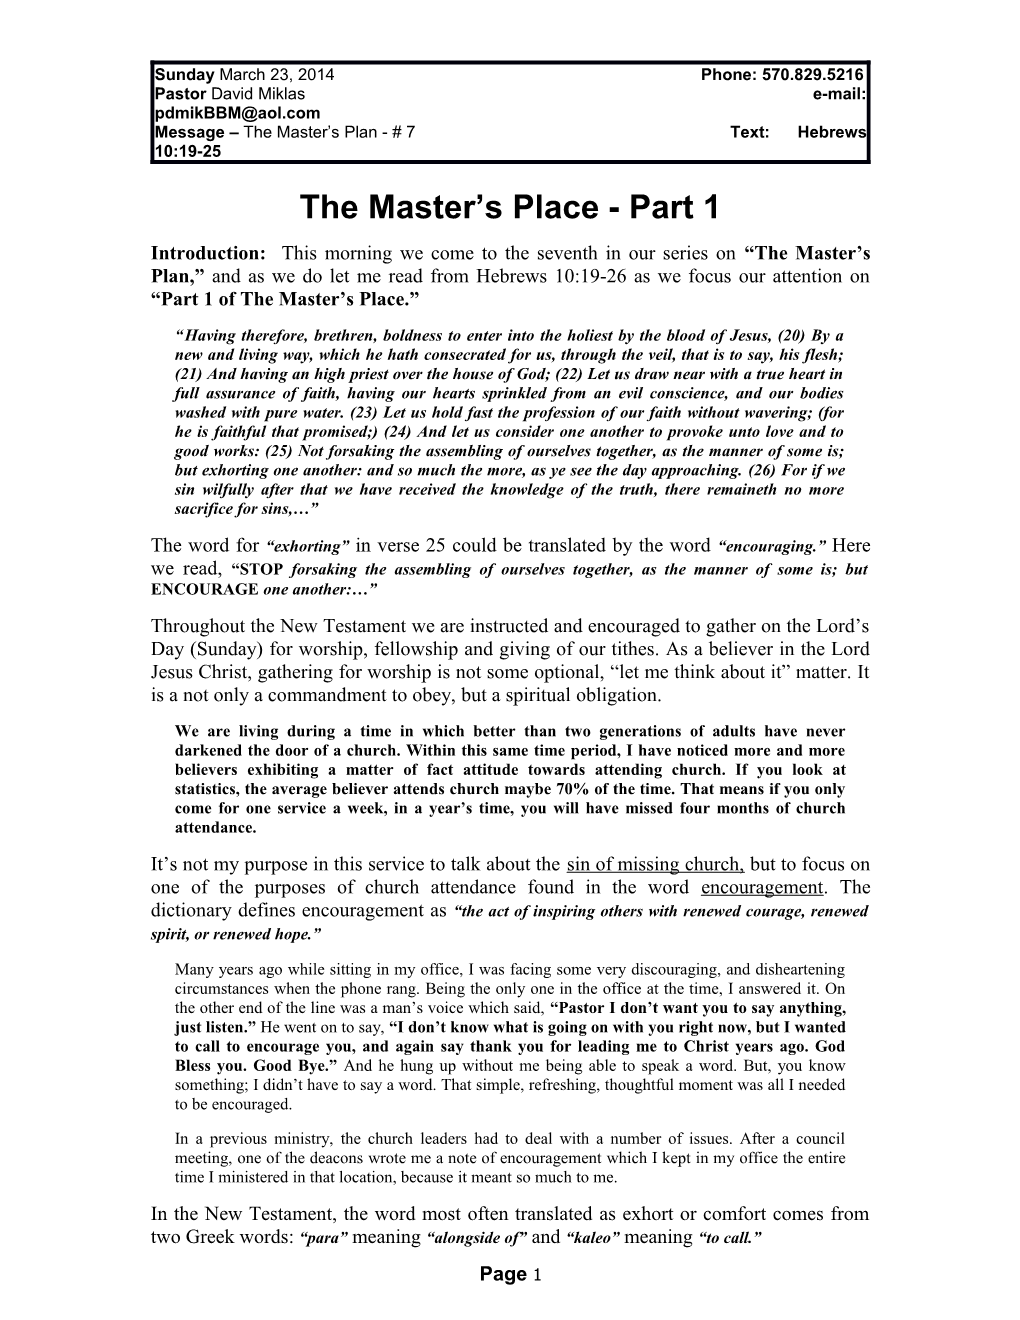 The Master's Place - Part 1